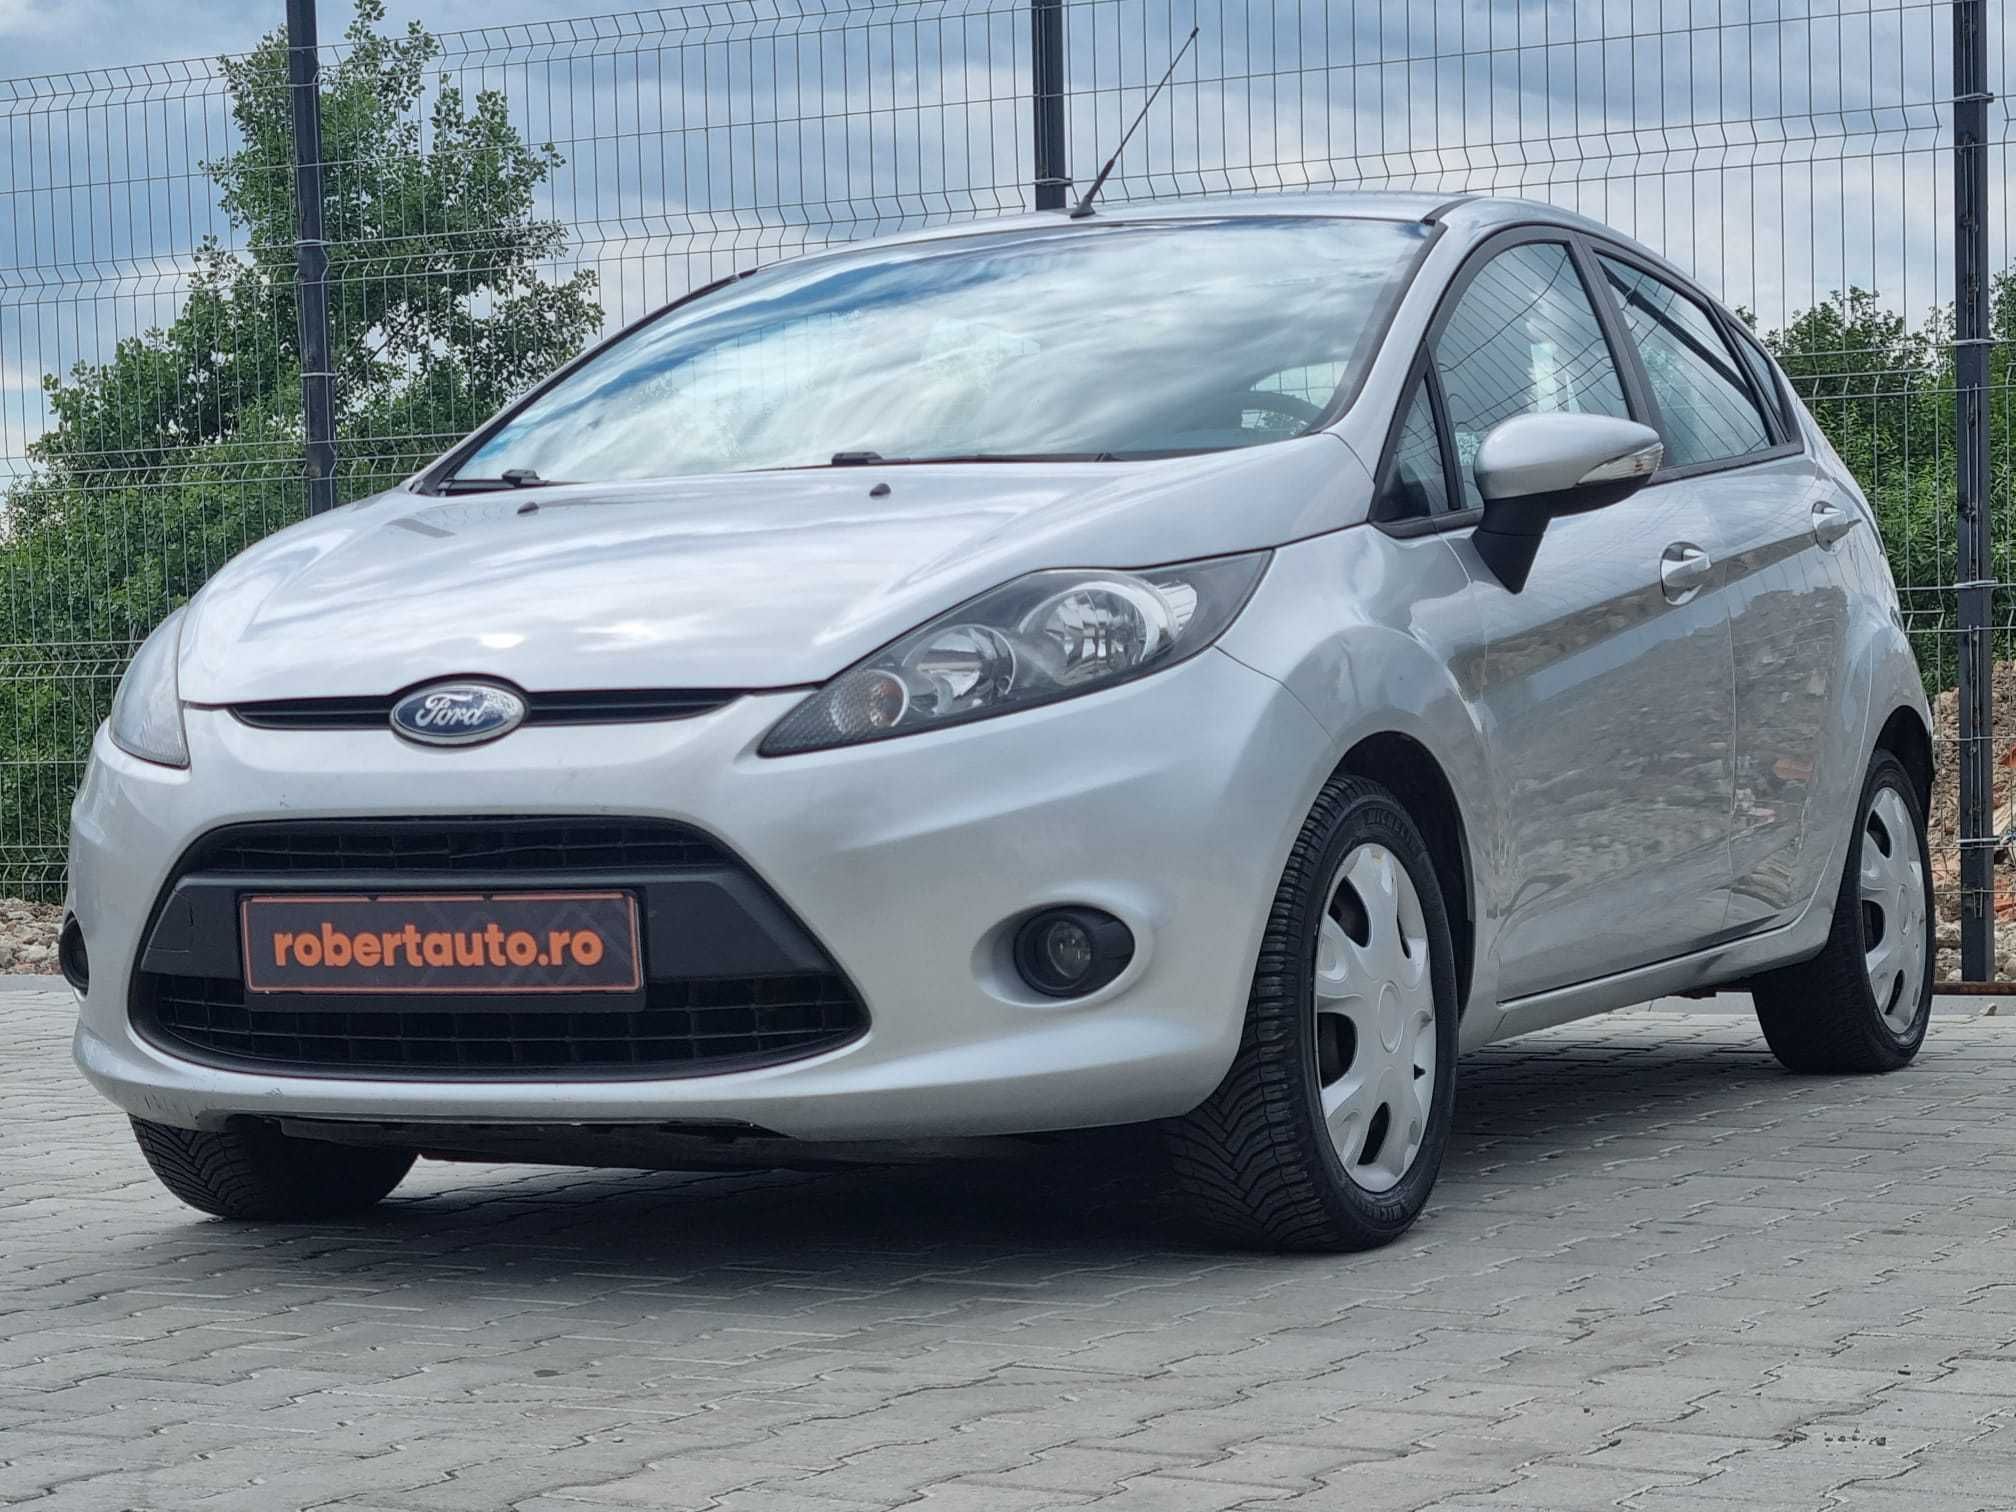 Ford Fiesta / 1.4 diesel / 147000 km / Aer cond / Rate / Finantare